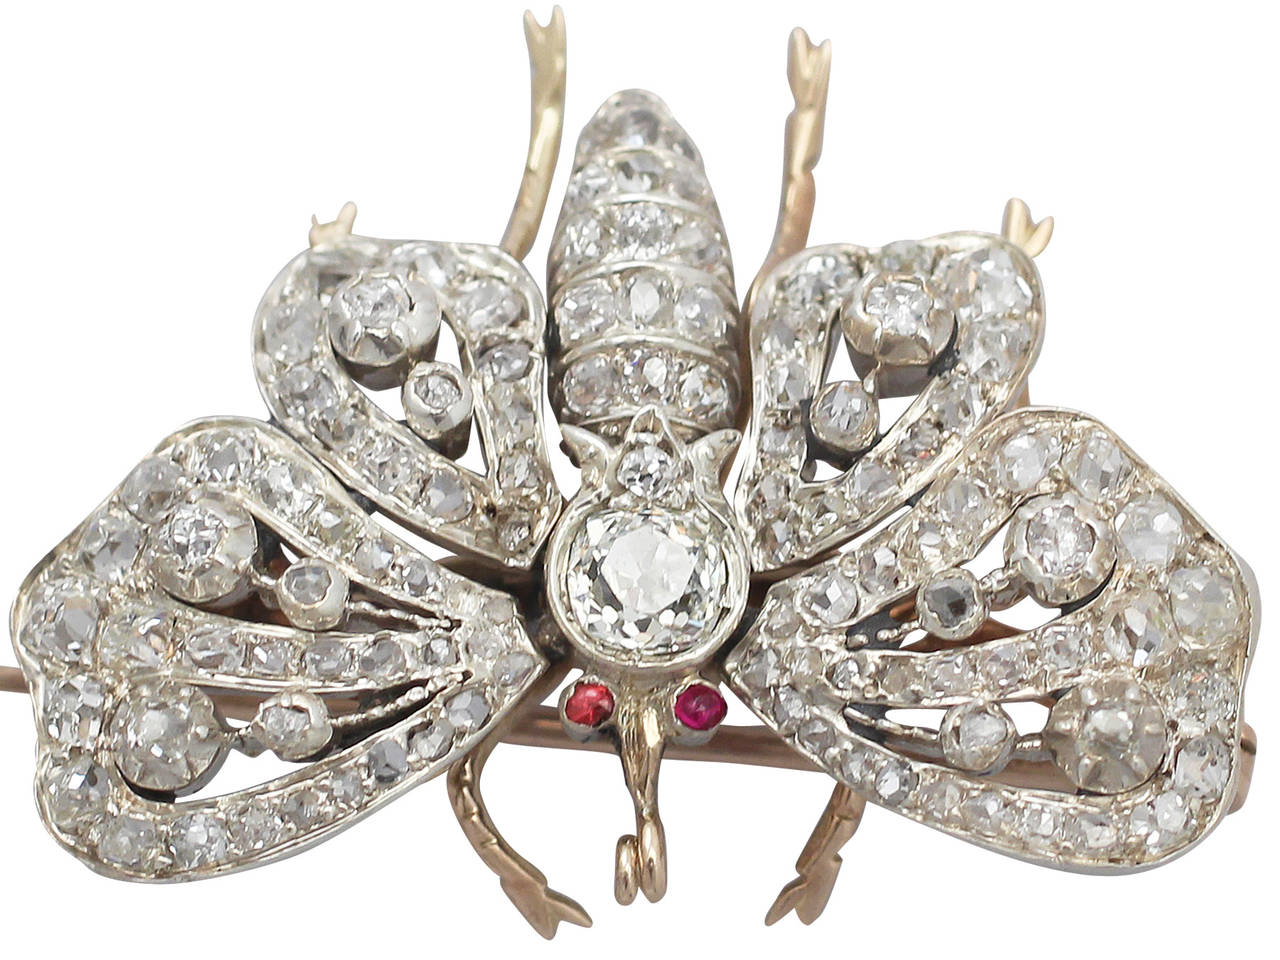 A stunning, fine and impressive 15 karat yellow gold, silver set antique butterfly brooch with old cut diamonds; part of our diverse antique jewelry and estate jewelry collections

This stunning antique Victorian brooch has been crafted in 15k